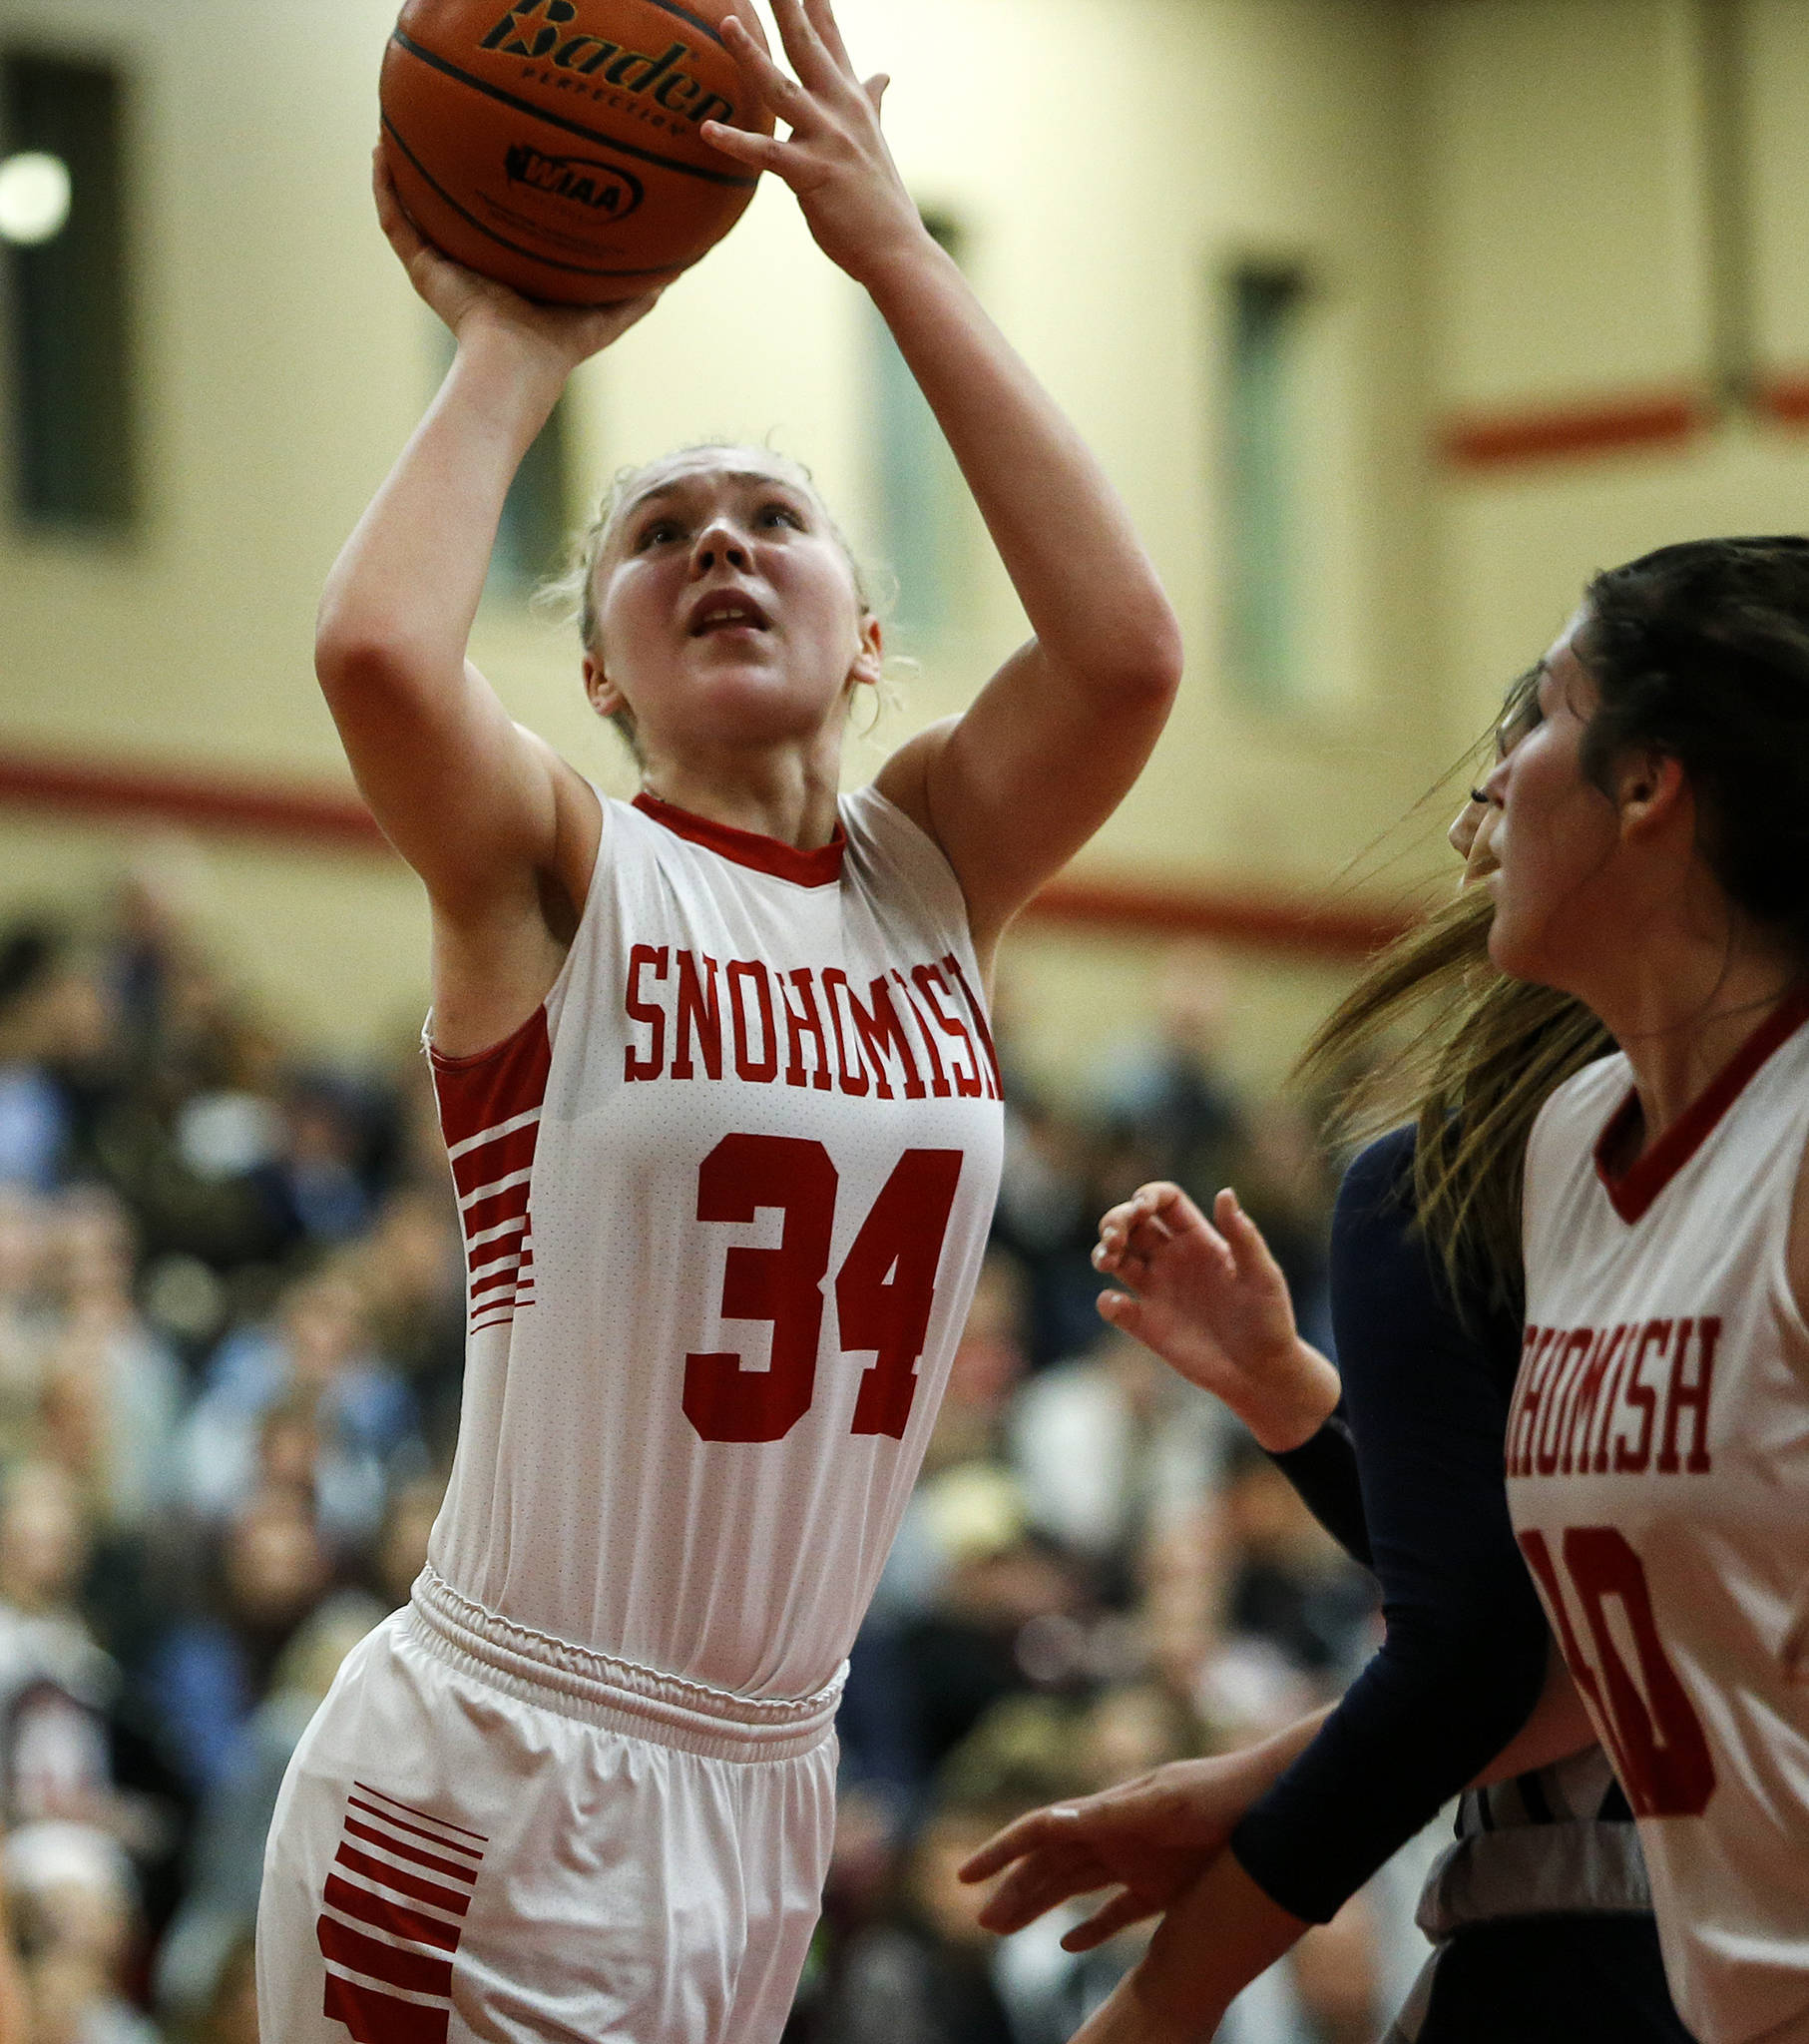 Snohomish’s Kyra Beckman (34) takes a shot during a game against Glacier Peak on Dec. 19, 2017, at Snohomish High School. (Ian Terry / The Herald)